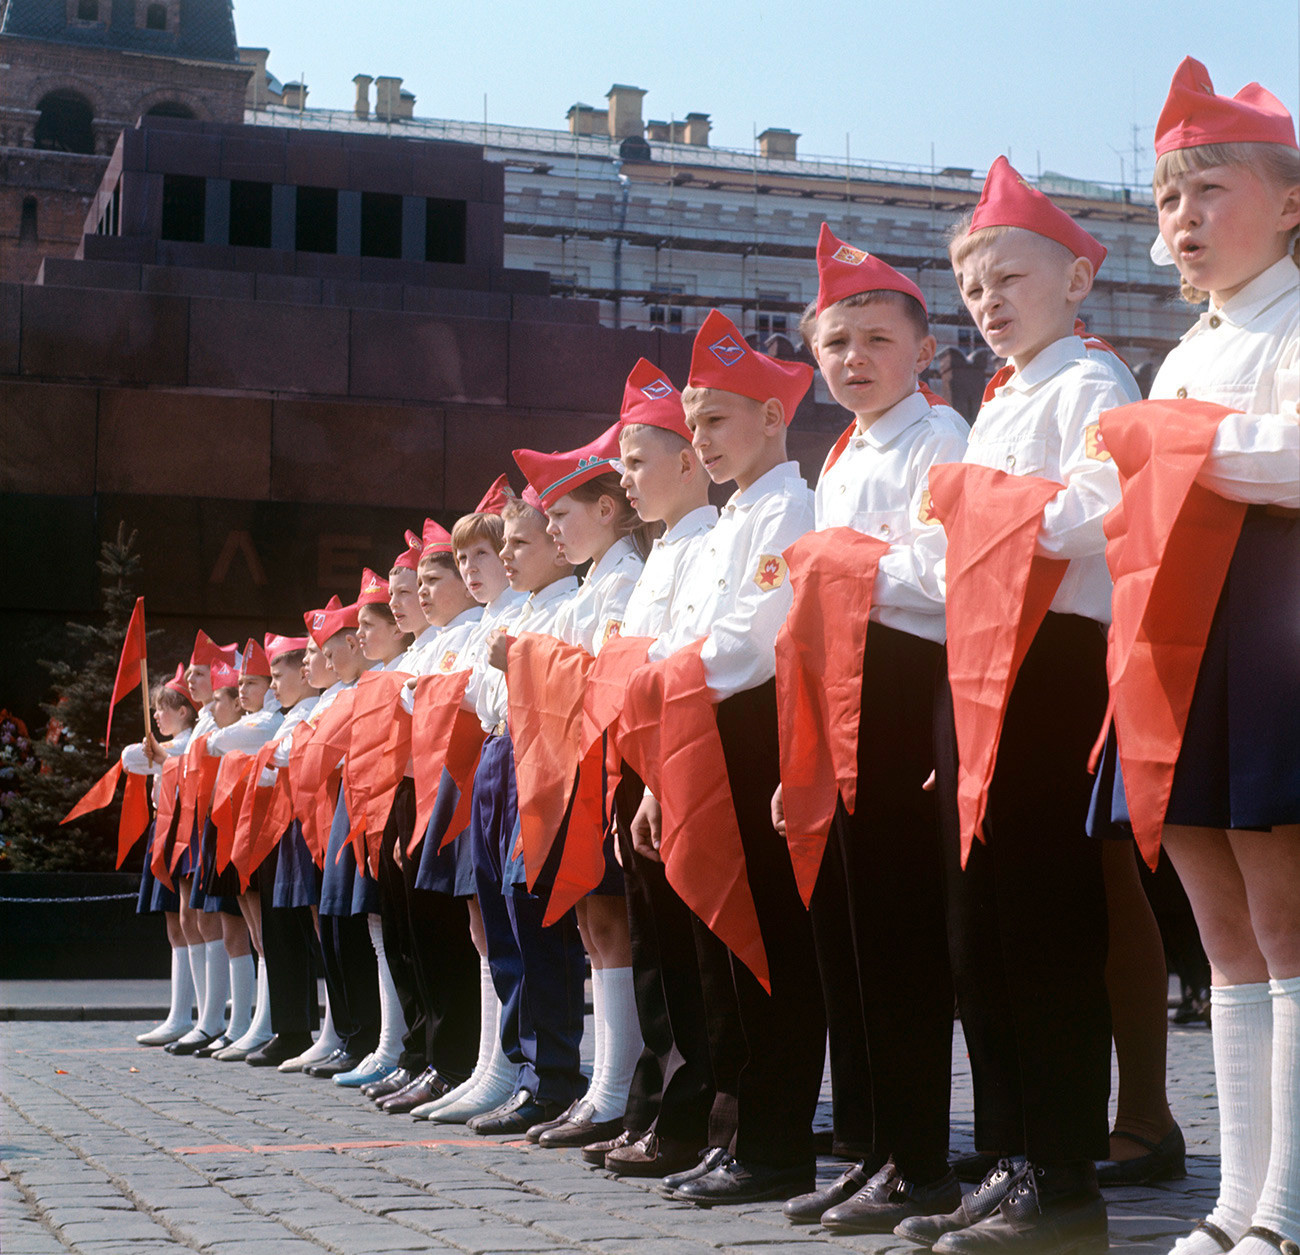 Children being recruited as Young Pioneers in the Red Square